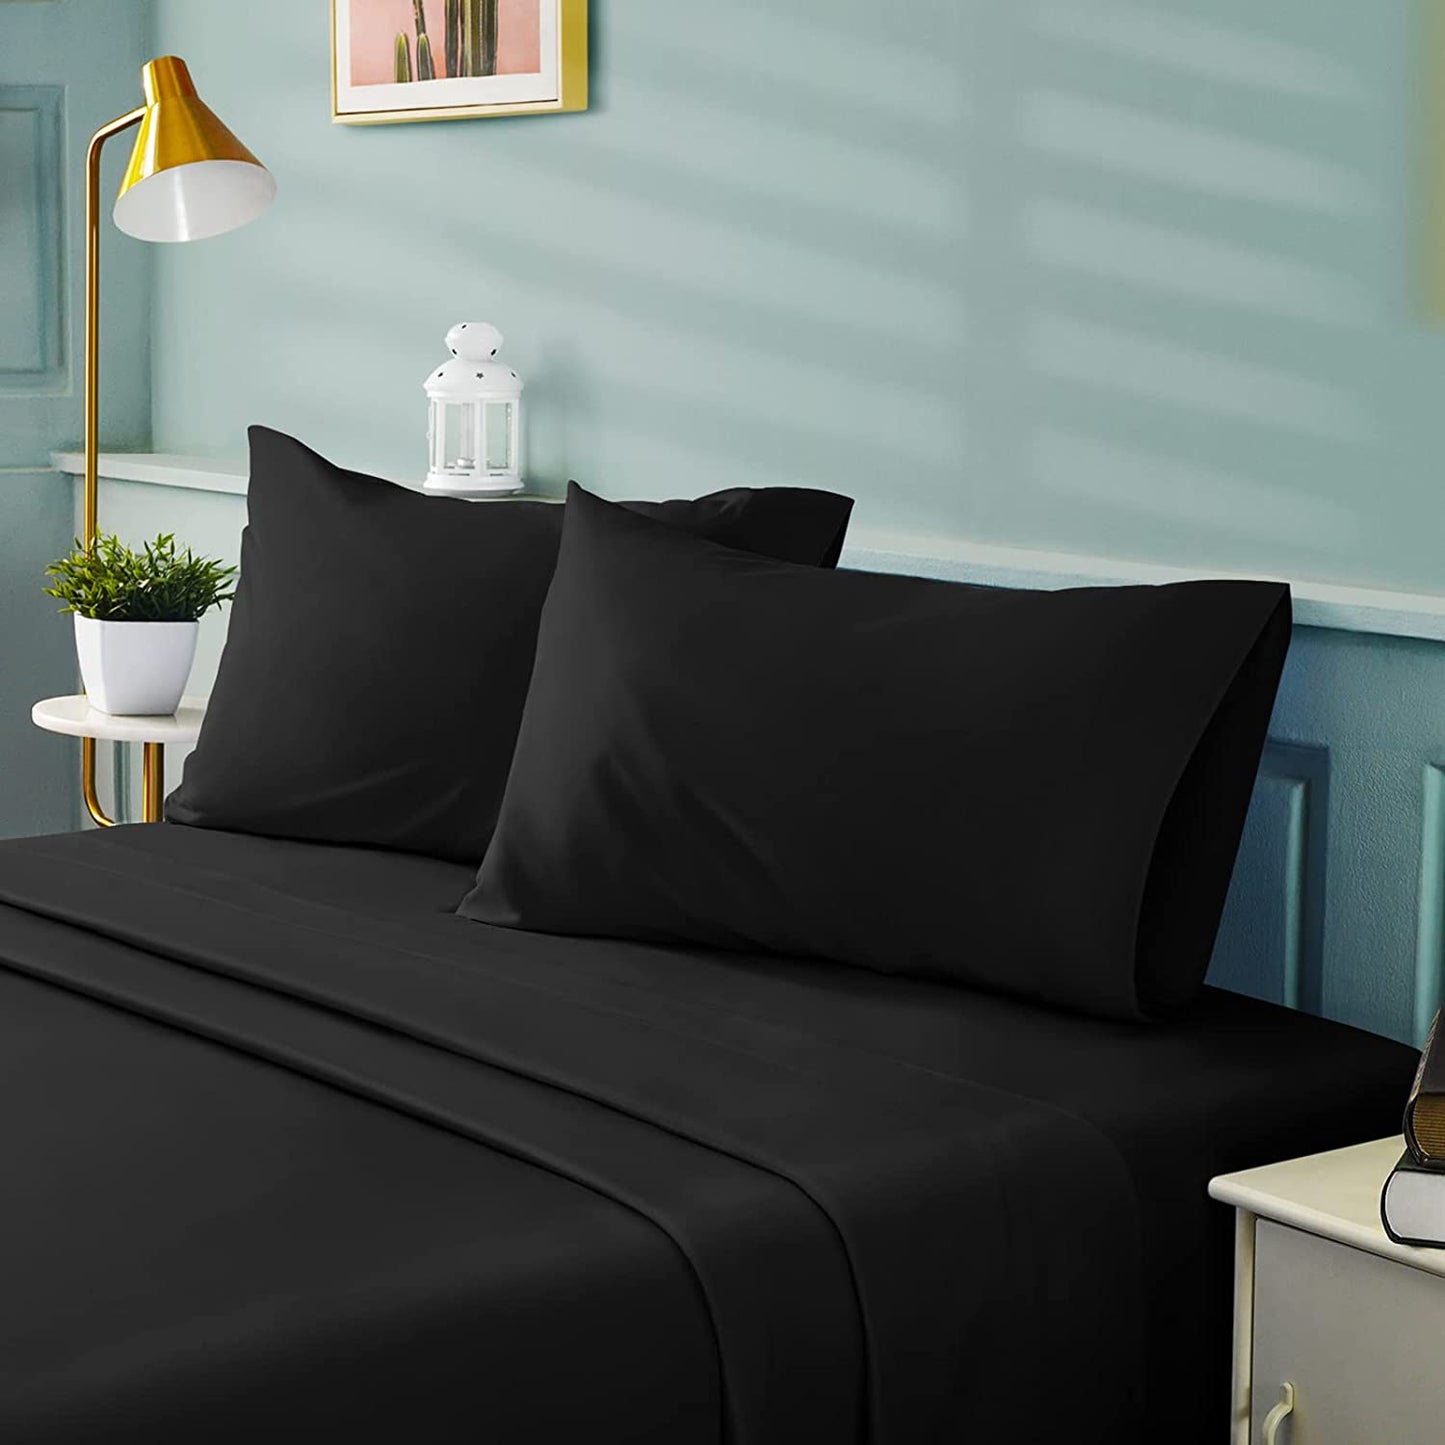 Buy Queen Size Flat Sheet Black Egyptian Cotton 1000 Thread Count at- Egyptianhomelinens.com